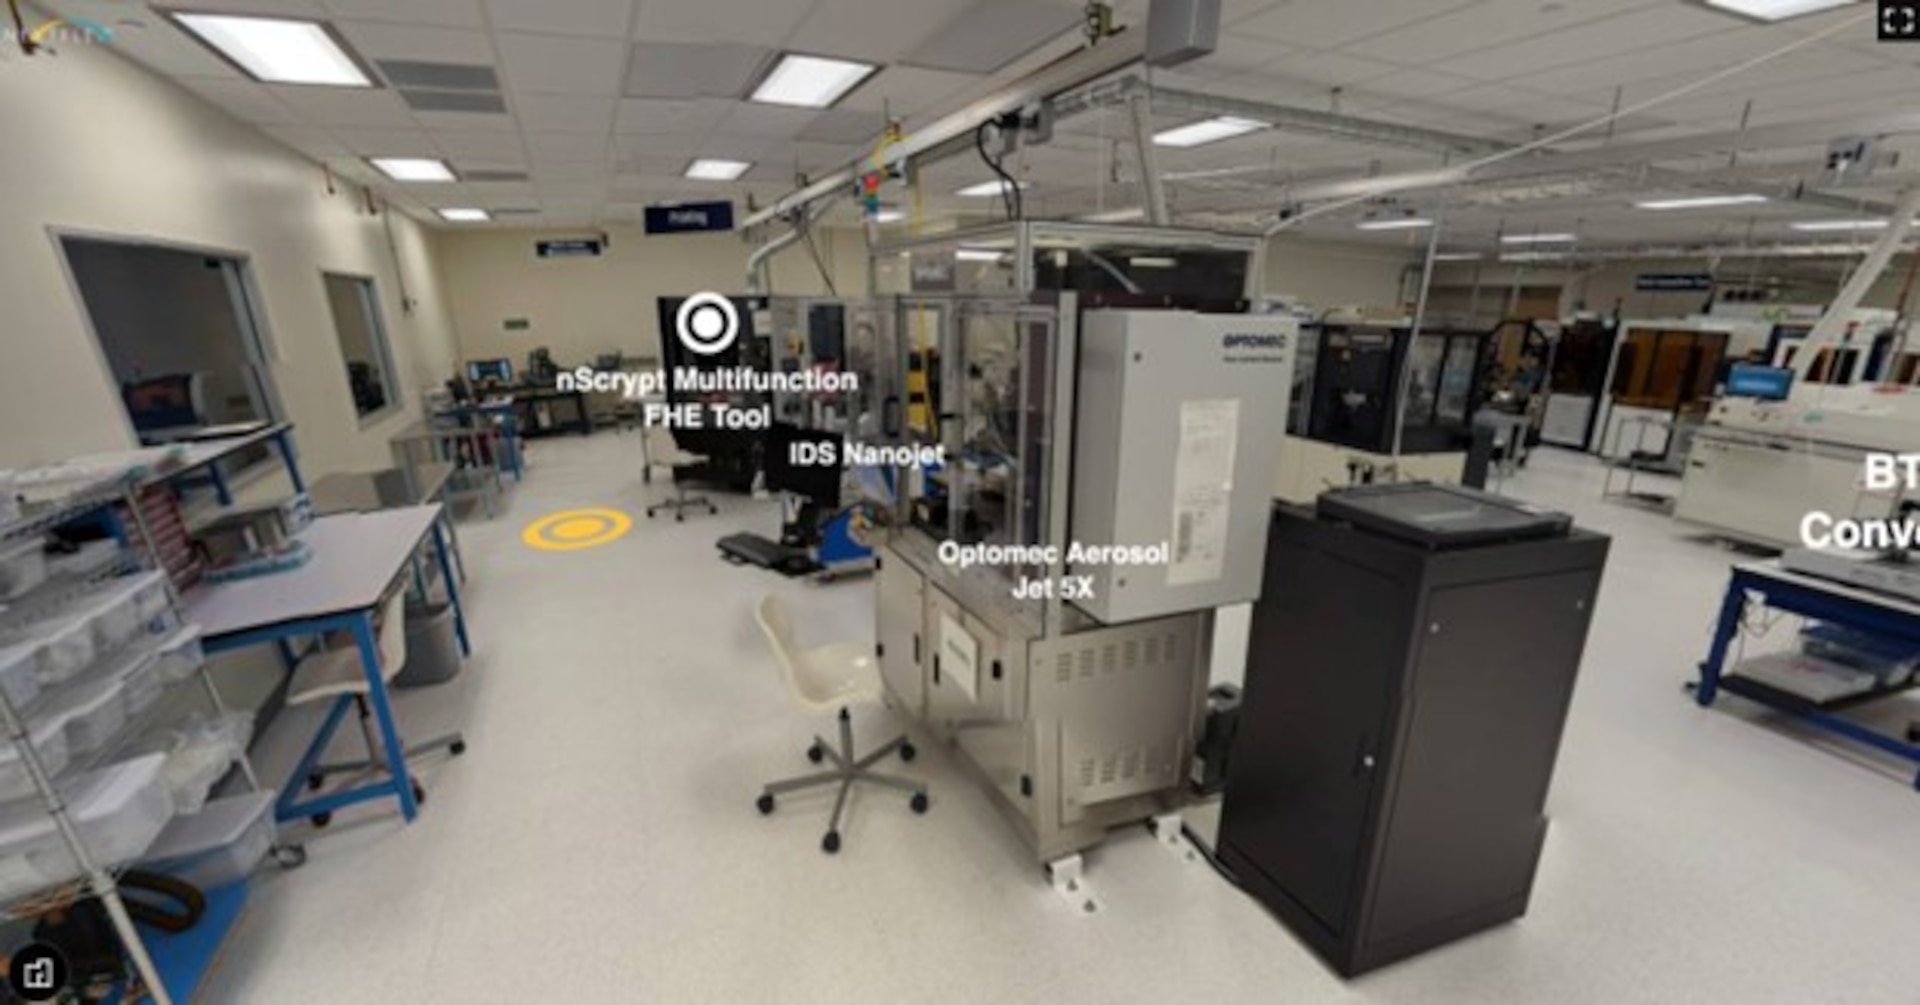 NextFlex’s 10,000+ square foot Tech Hub, which features two cleanrooms with sheet-fed processing; flexible process flows to accommodate high mix, low volume manufacturing; and commercially ready tools for printing and assembly, and equipment for the design, prototype, and produce pilot-scale flexible and additive hybrid electronics. Image courtesy of NextFlex.